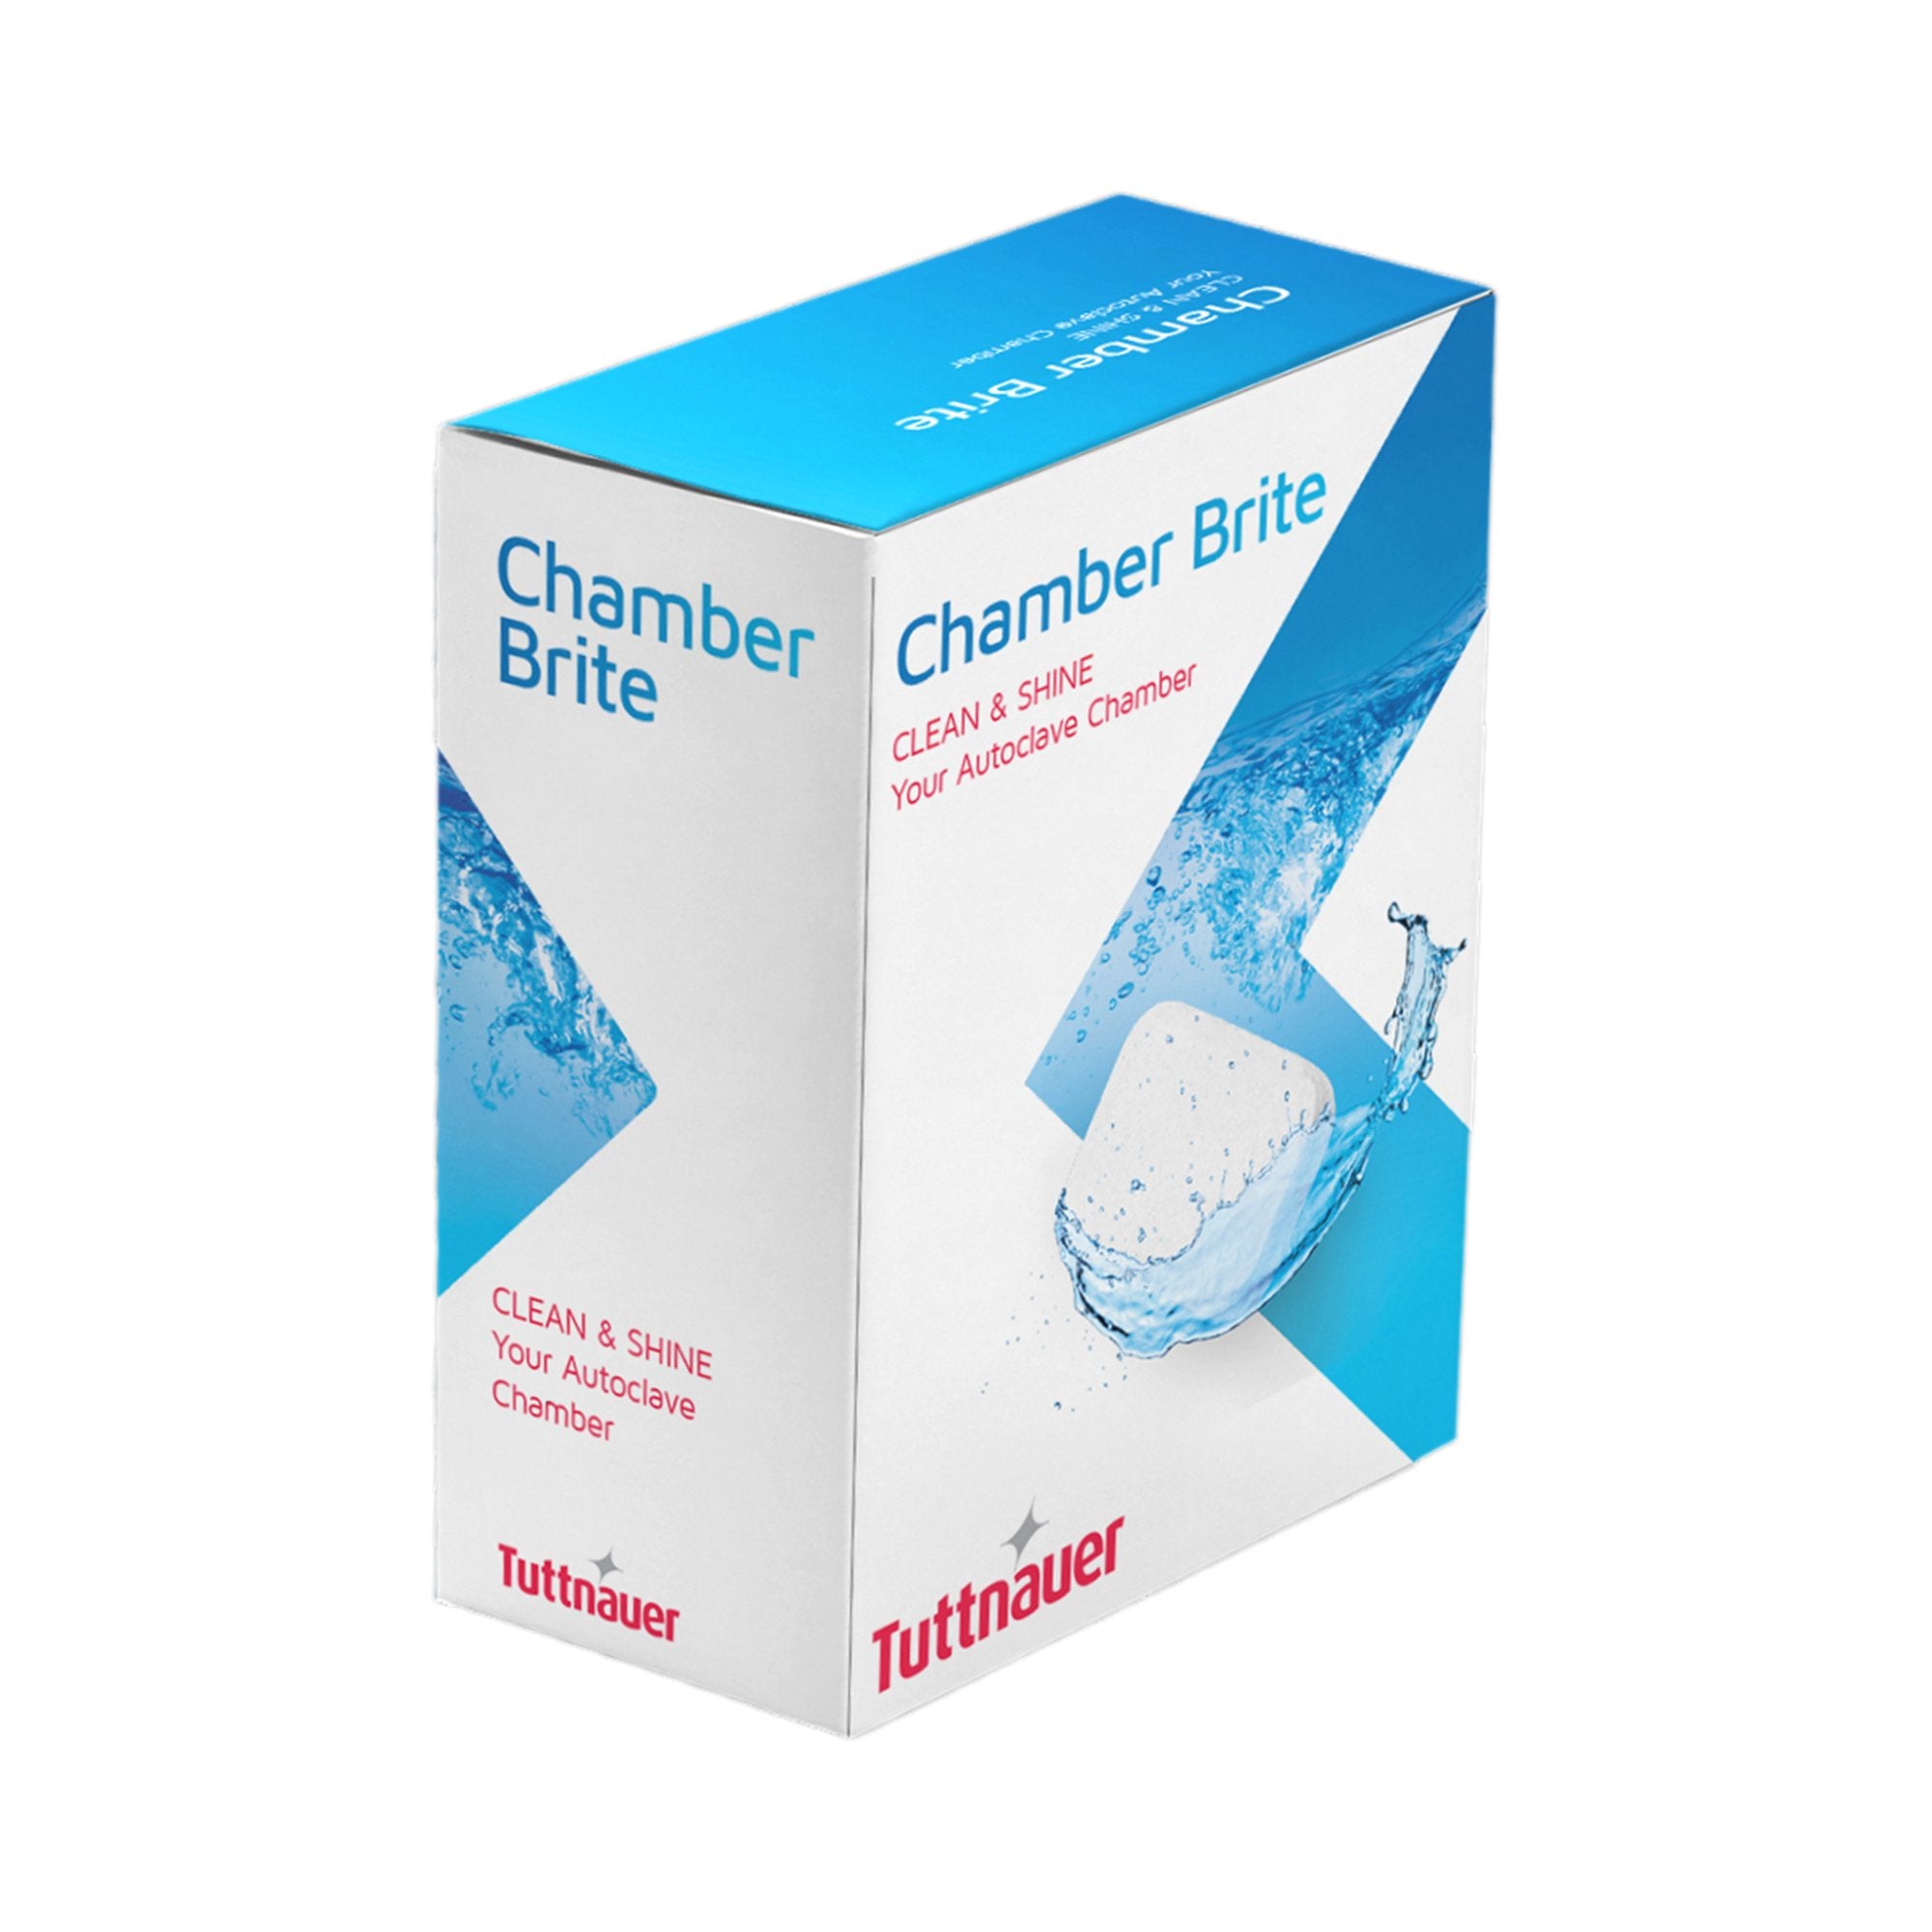 Chamber Brite Autoclave Chamber Cleaner